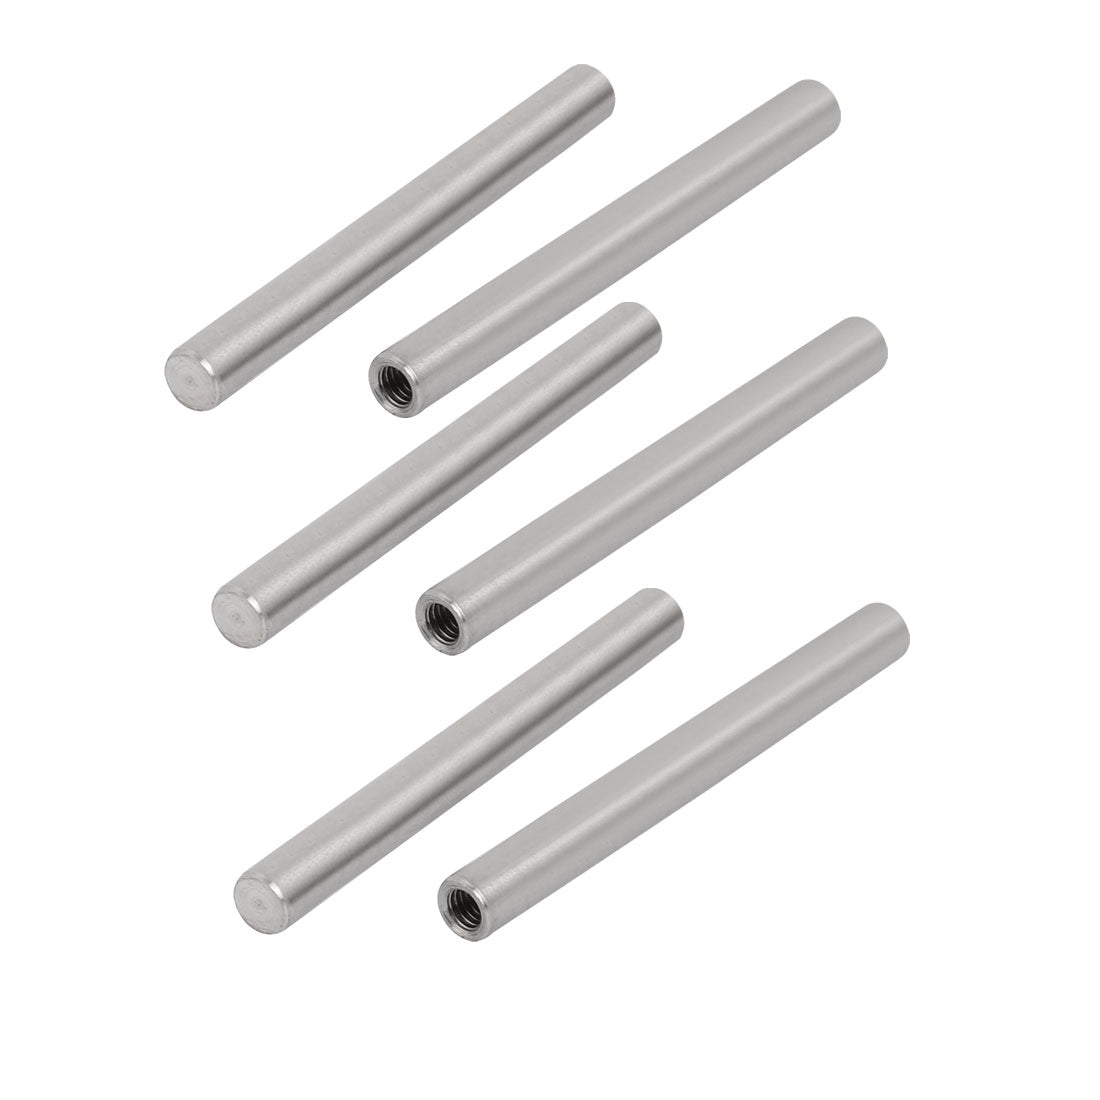 uxcell Uxcell 304 Stainless Steel M4 Female Thread 6mm x 60mm Cylindrical Dowel Pin 6pcs